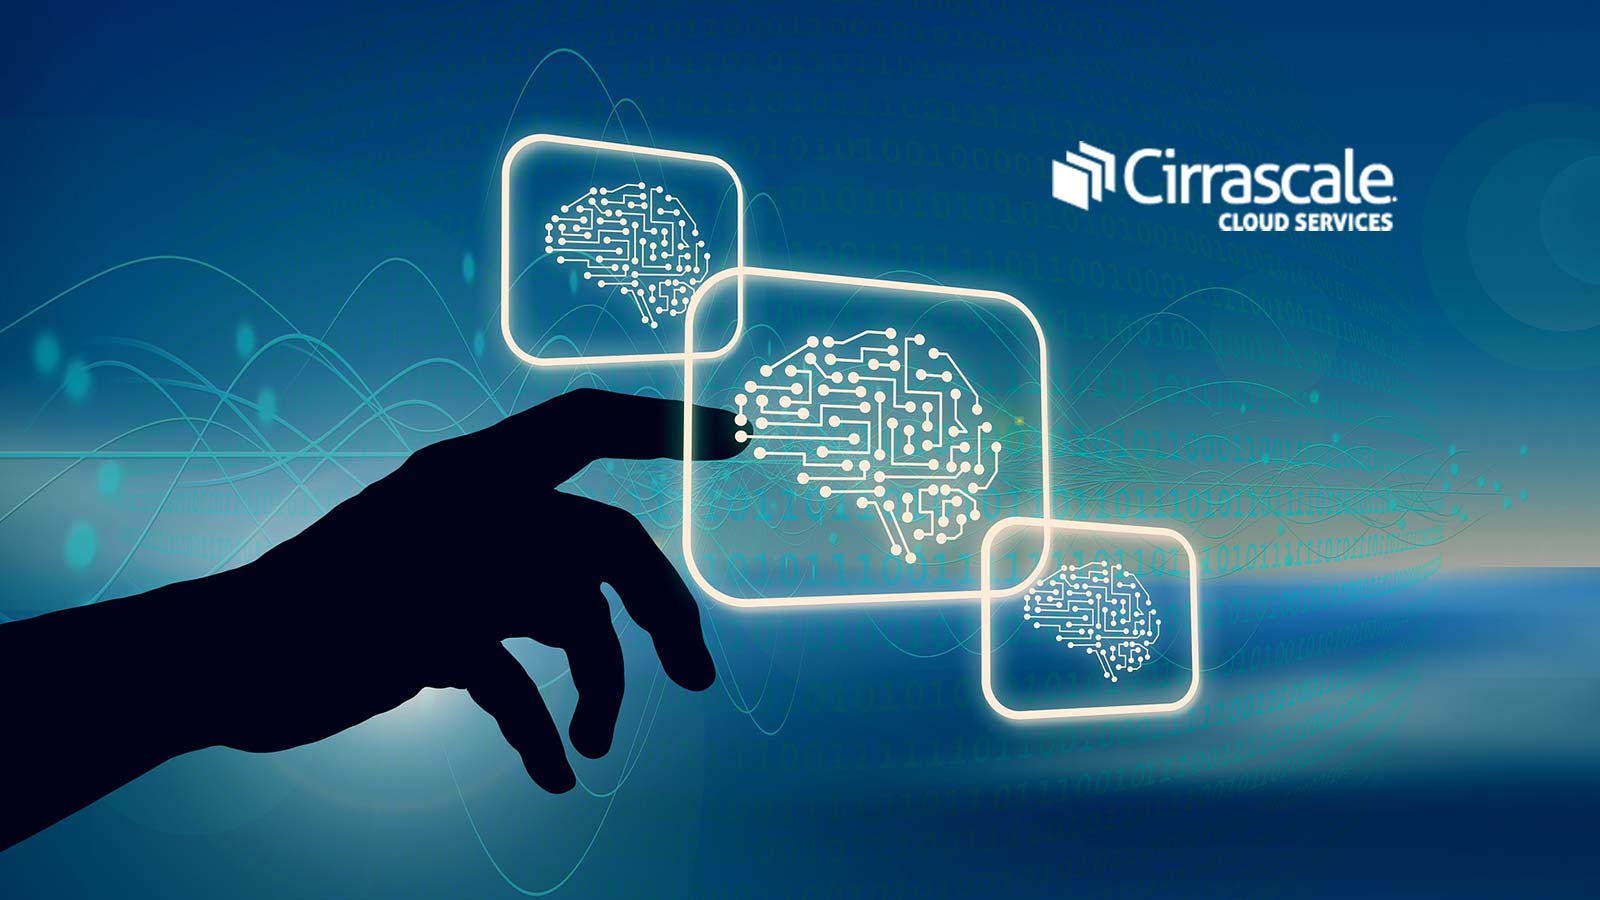 Cirrascale Cloud Services Broadens Deep Learning Cloud Offerings With World’s Most Powerful GPU For AI Supercomputing